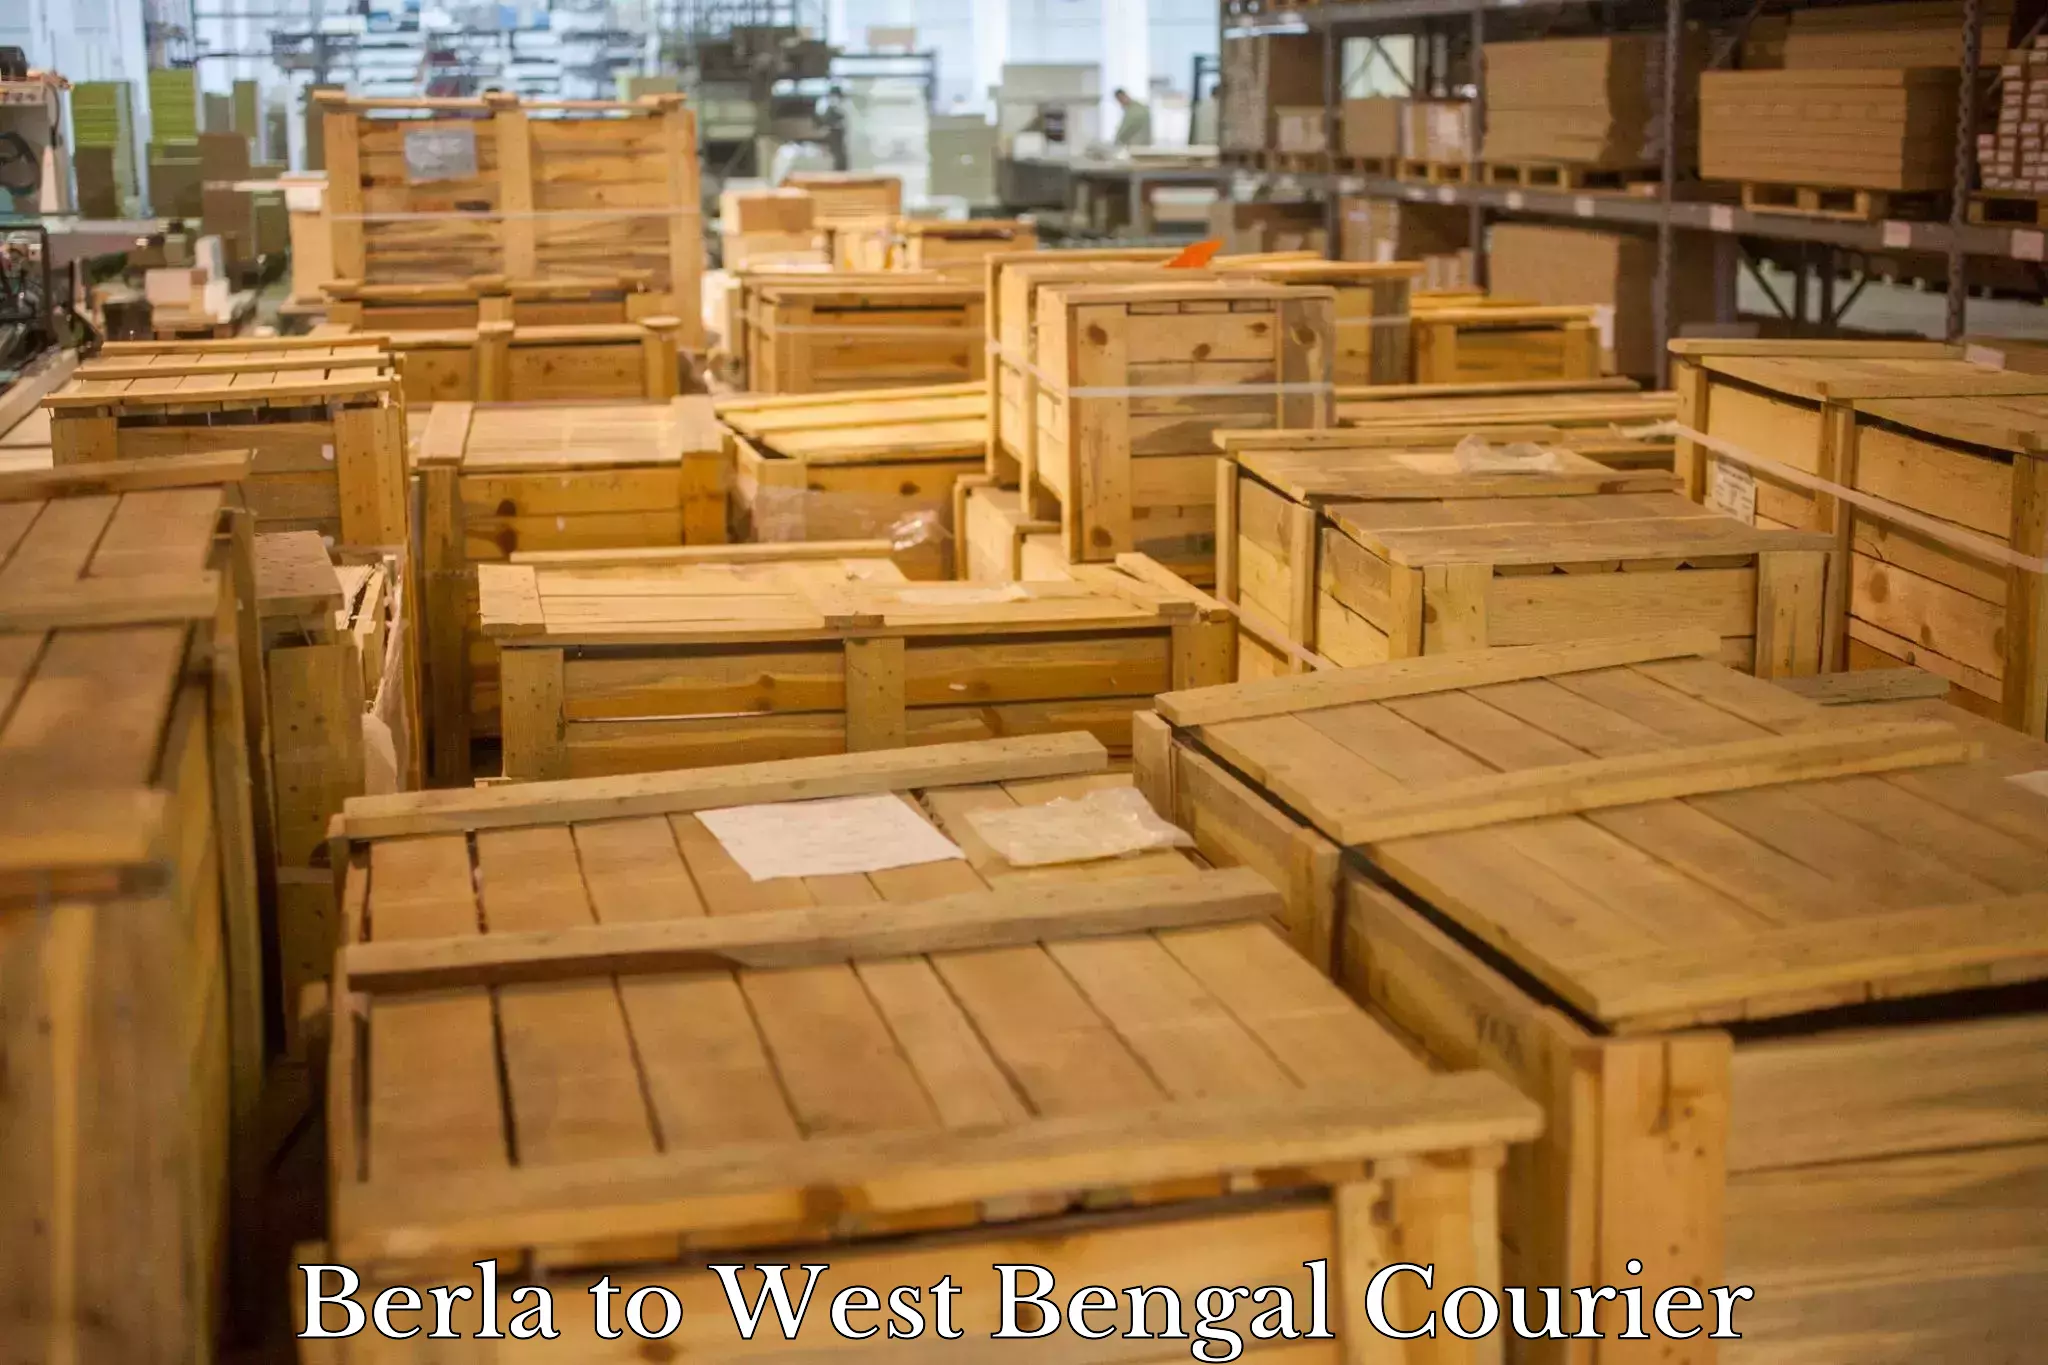 Custom courier packaging Berla to West Bengal